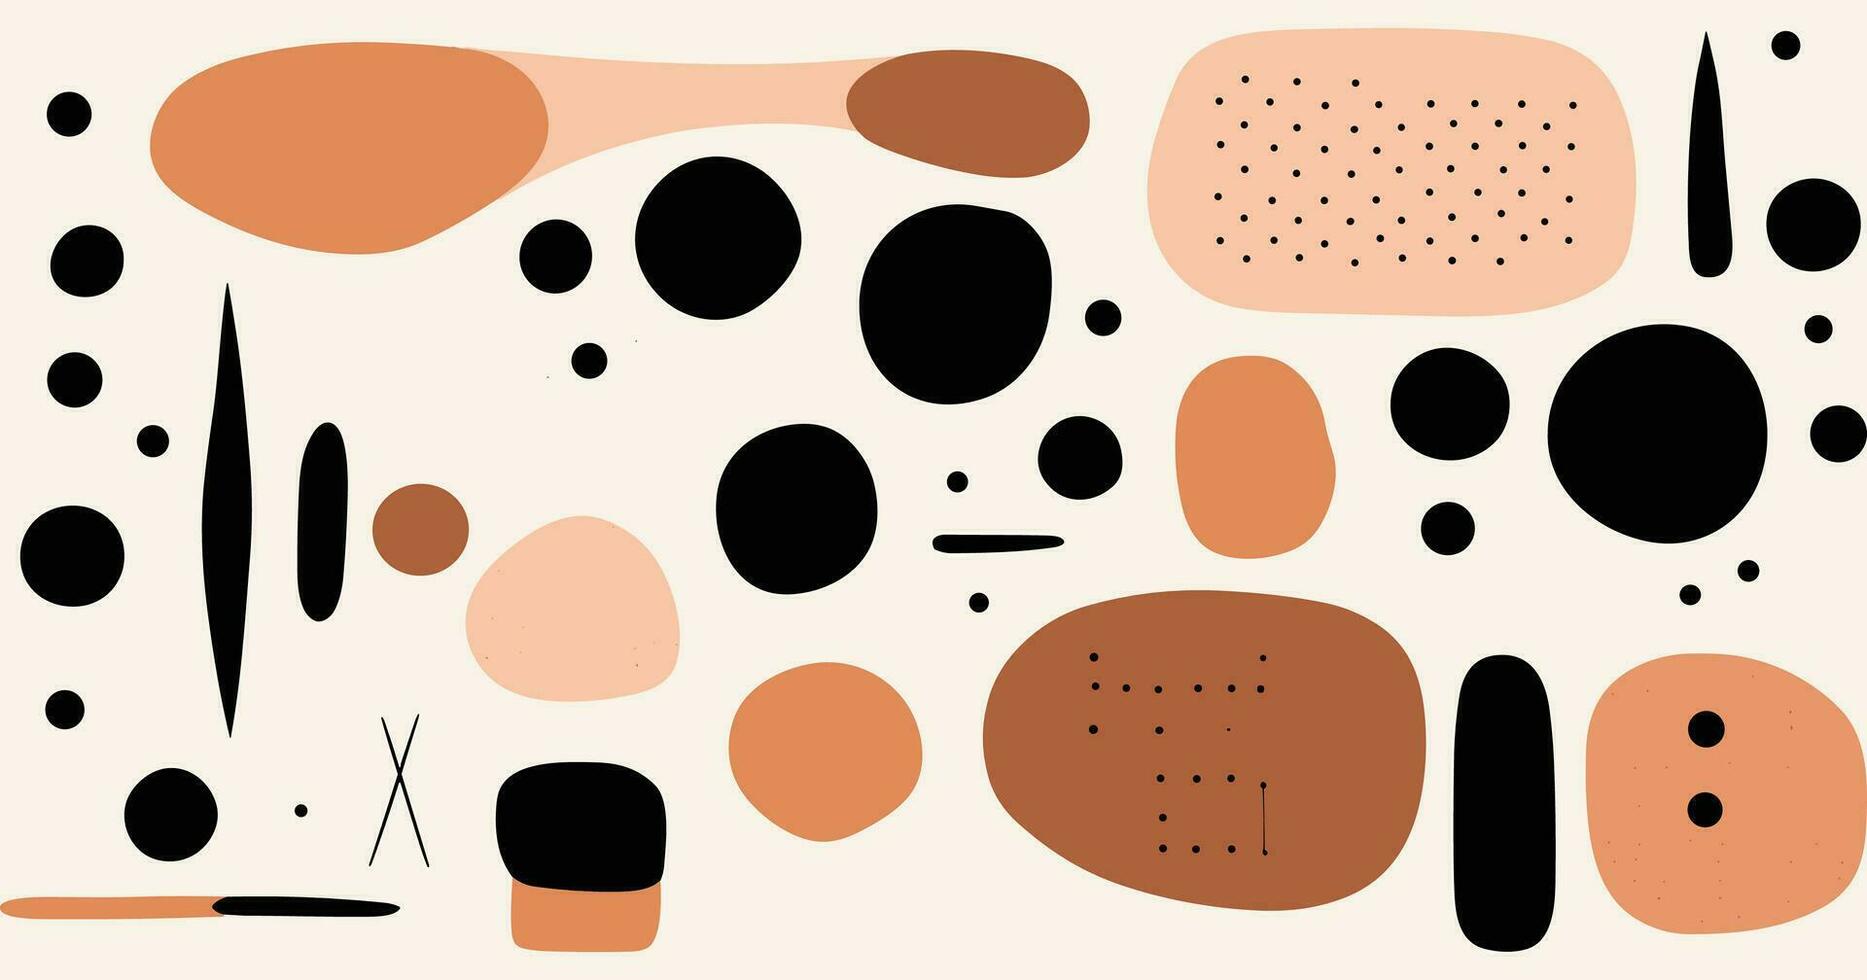 abstract design with black, white and peach shapes, in the style of isolated figures, earthy organic shapes, whimsical minimalism, dotted, abstract minimalism appreciator vector